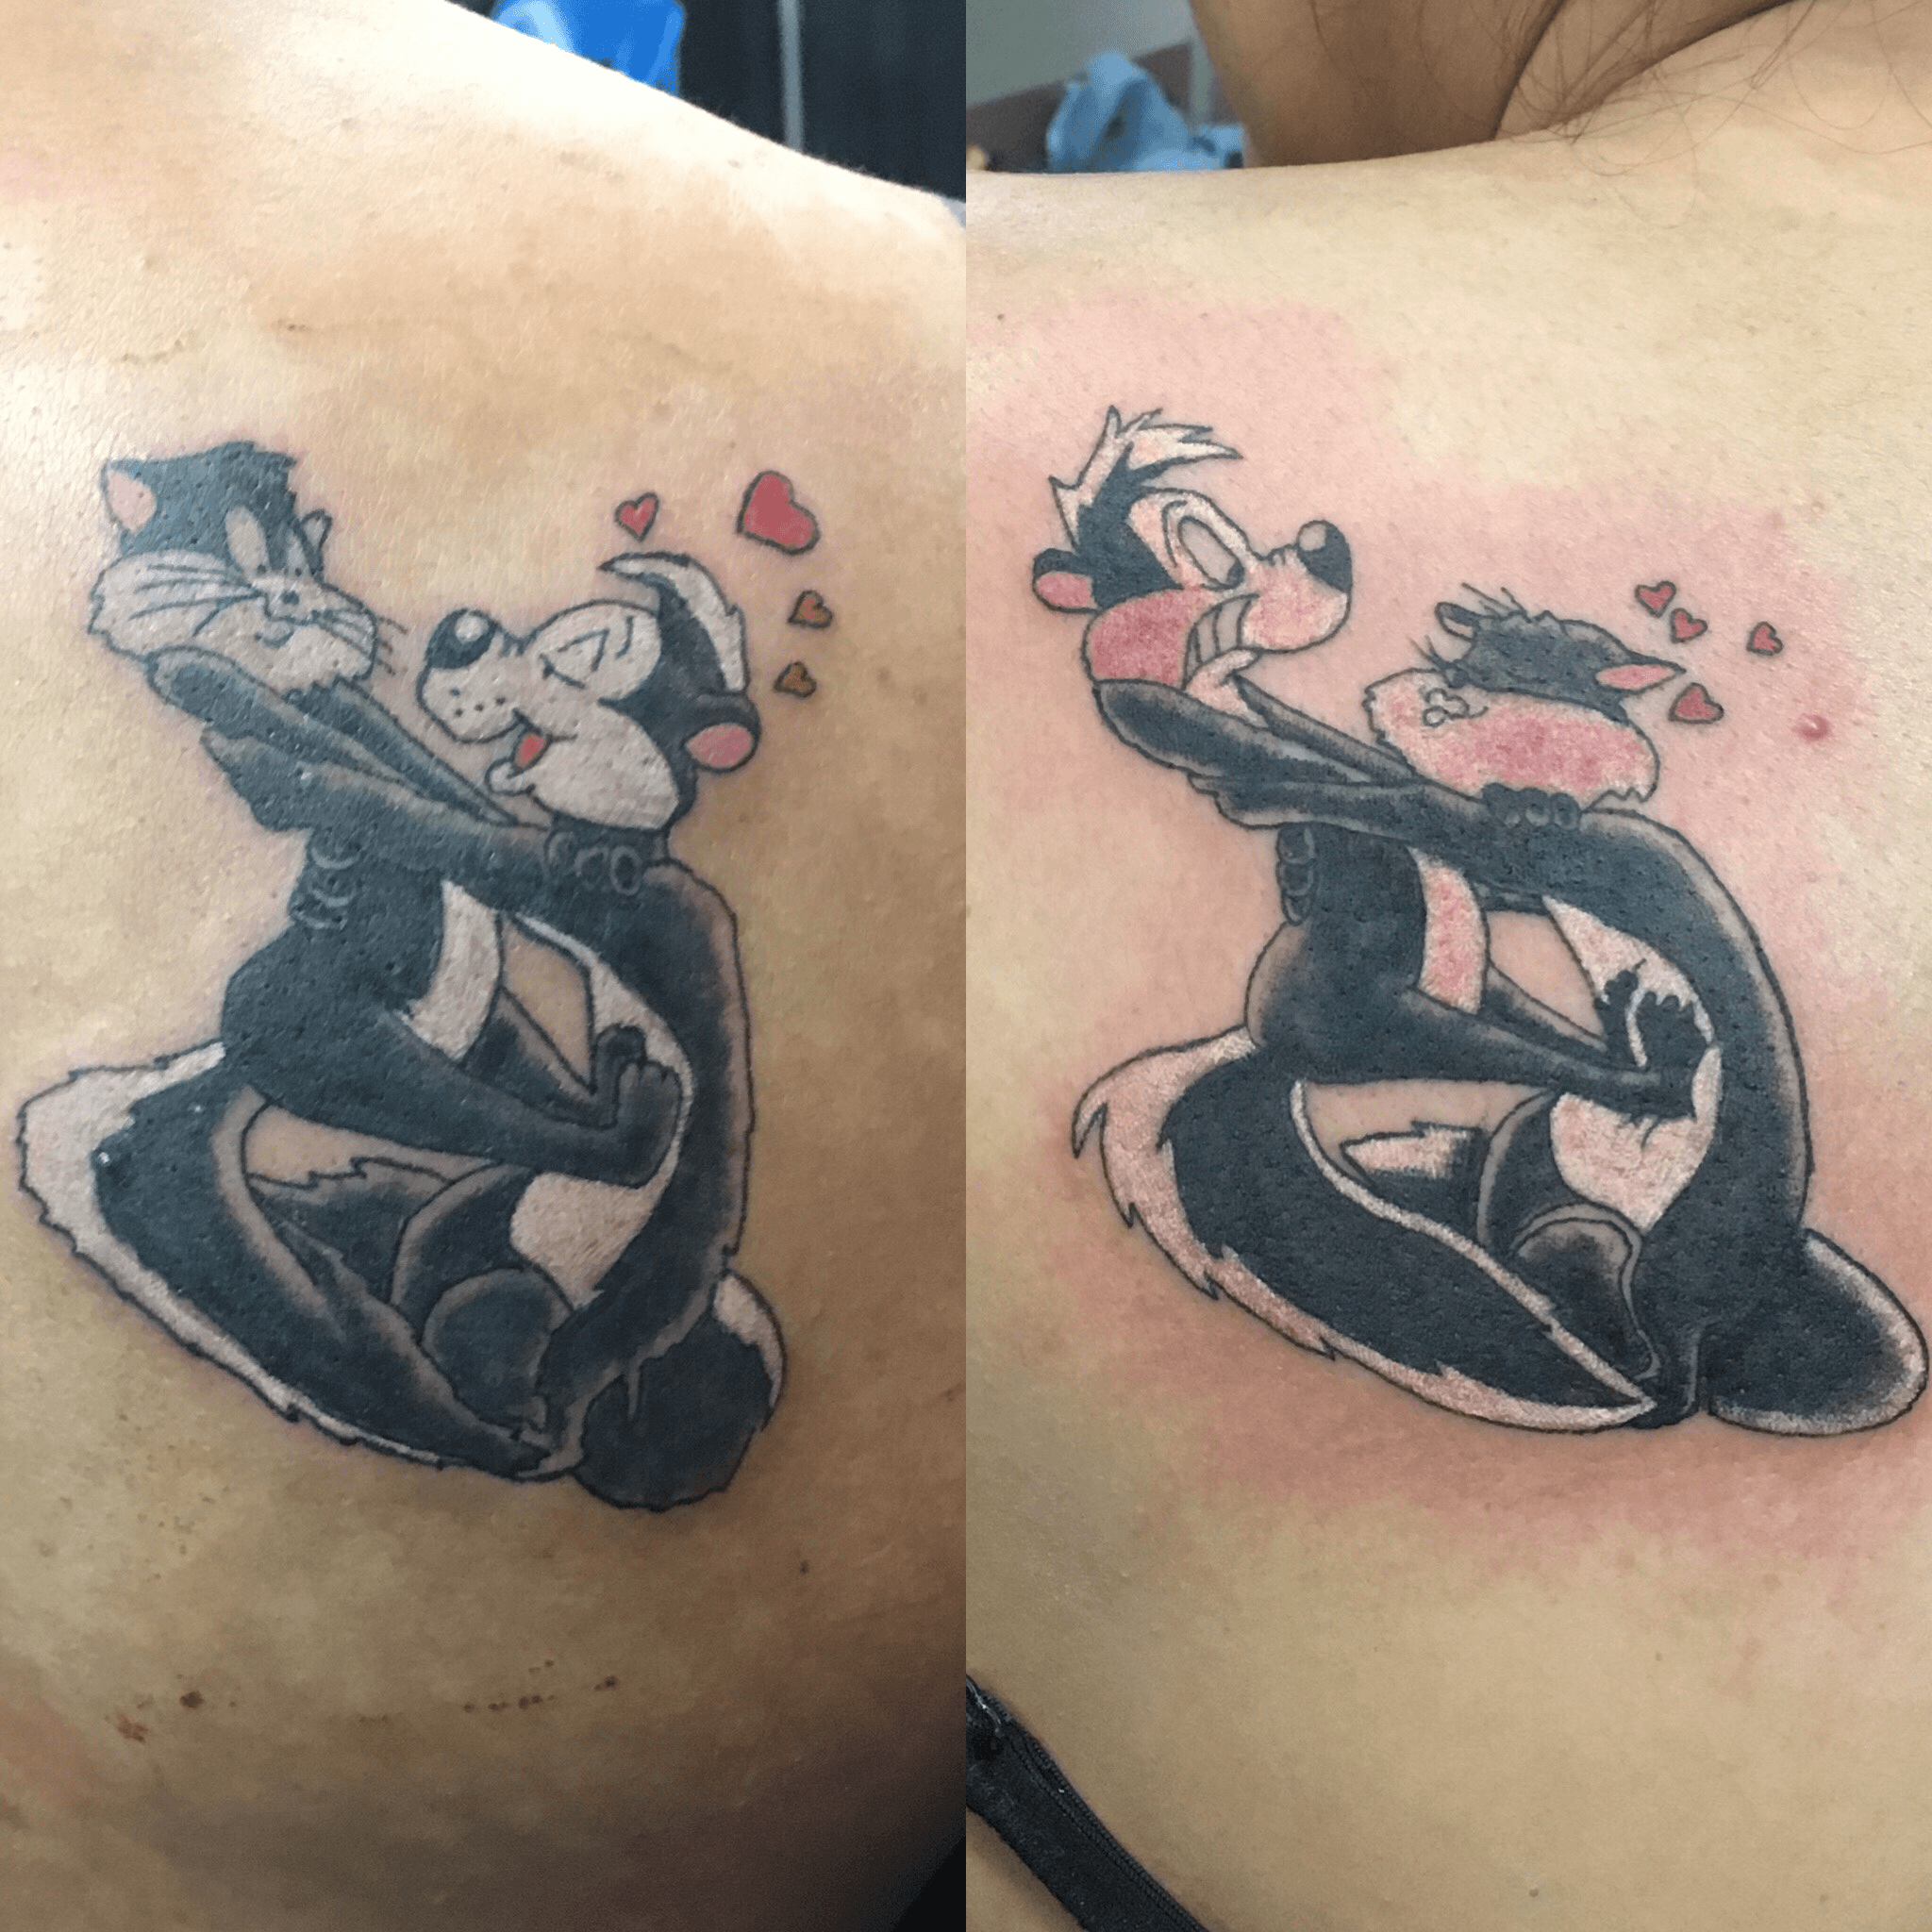 Pepe le pew tattoo by diosoy on DeviantArt